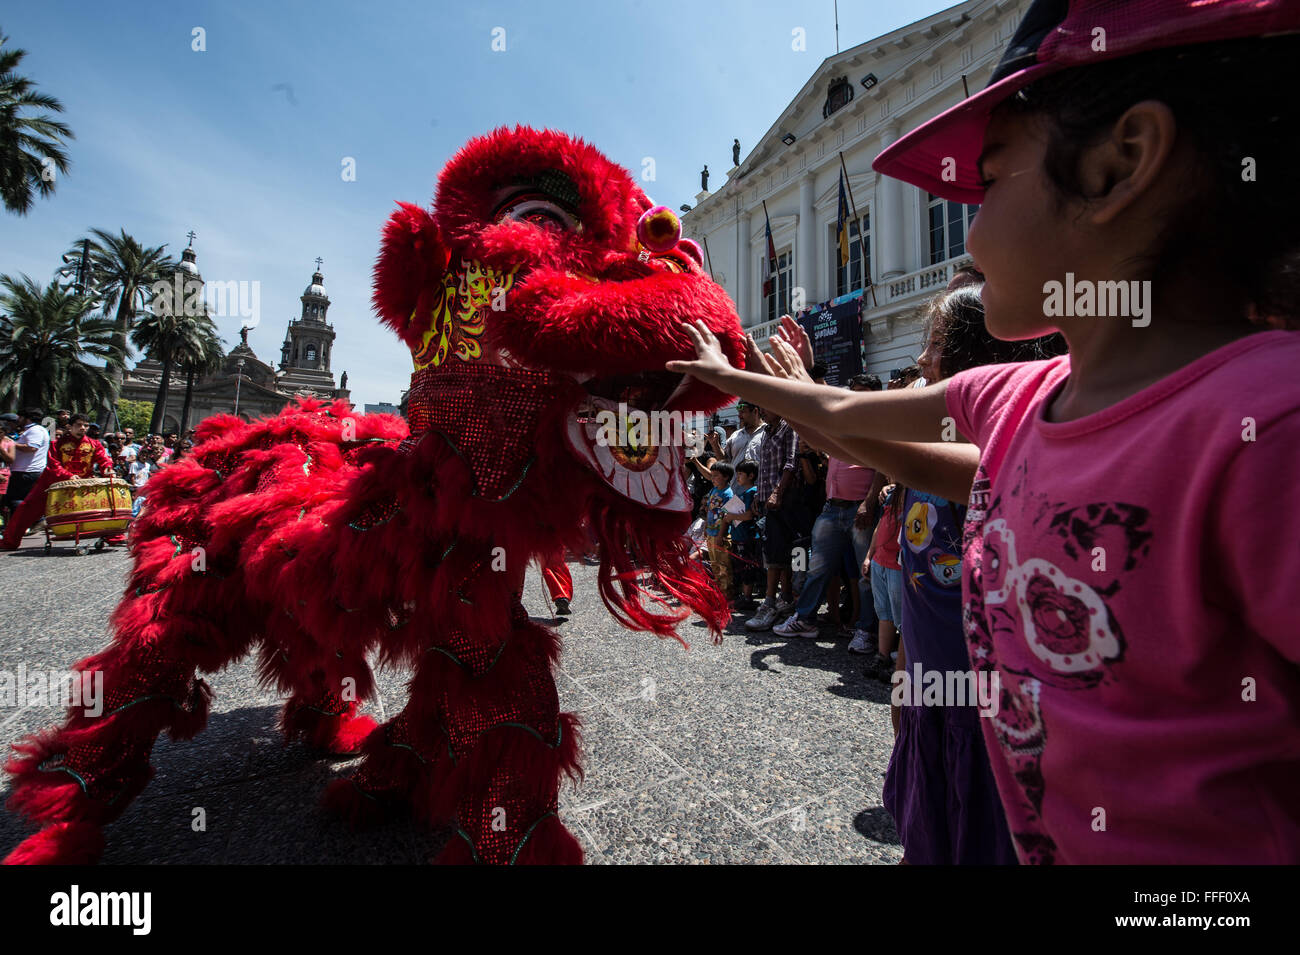 (160212) -- SANTIAGO, Feb. 12, 2016 (Xinhua) -- Children interact with a Chinese lion during the Chinese Lunar New Year and the 'Feast of Santiago' celebrations, at the Plaza de Armas in Santiago, capital of Chile, on Feb. 12, 2016. 'Feast of Santiago' celebrates the 475th anniversary of the founding of the Chilean capital of Santiago by Pedro de Valdivia. (Xinhua/Jorge Villegas) (jg) (fnc) Stock Photo